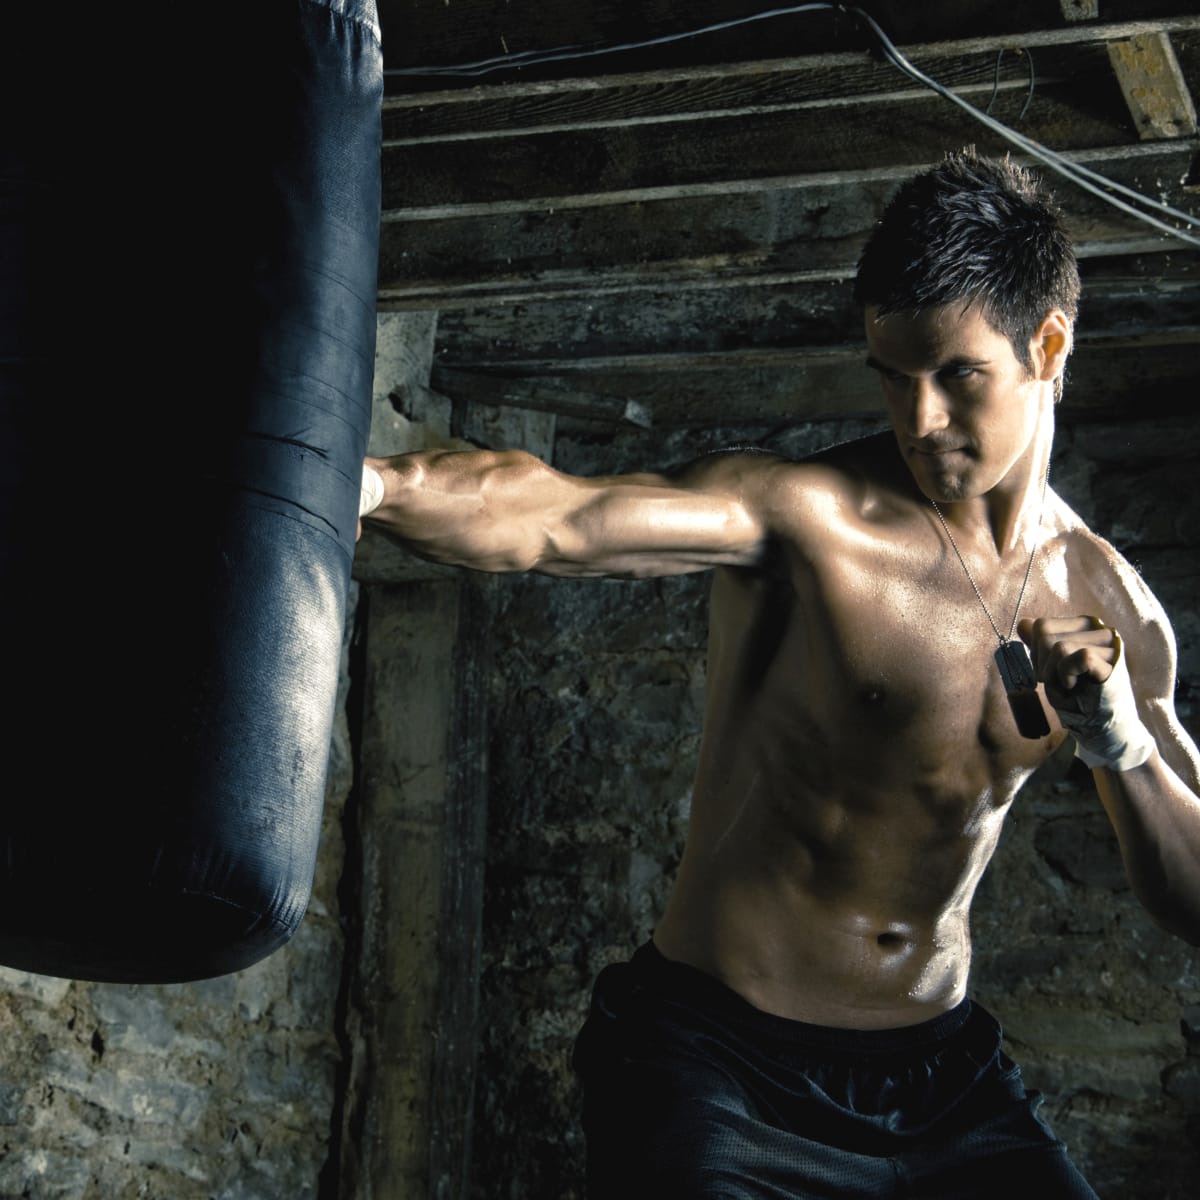 Shadow Boxing – WorkoutLabs Exercise Guide